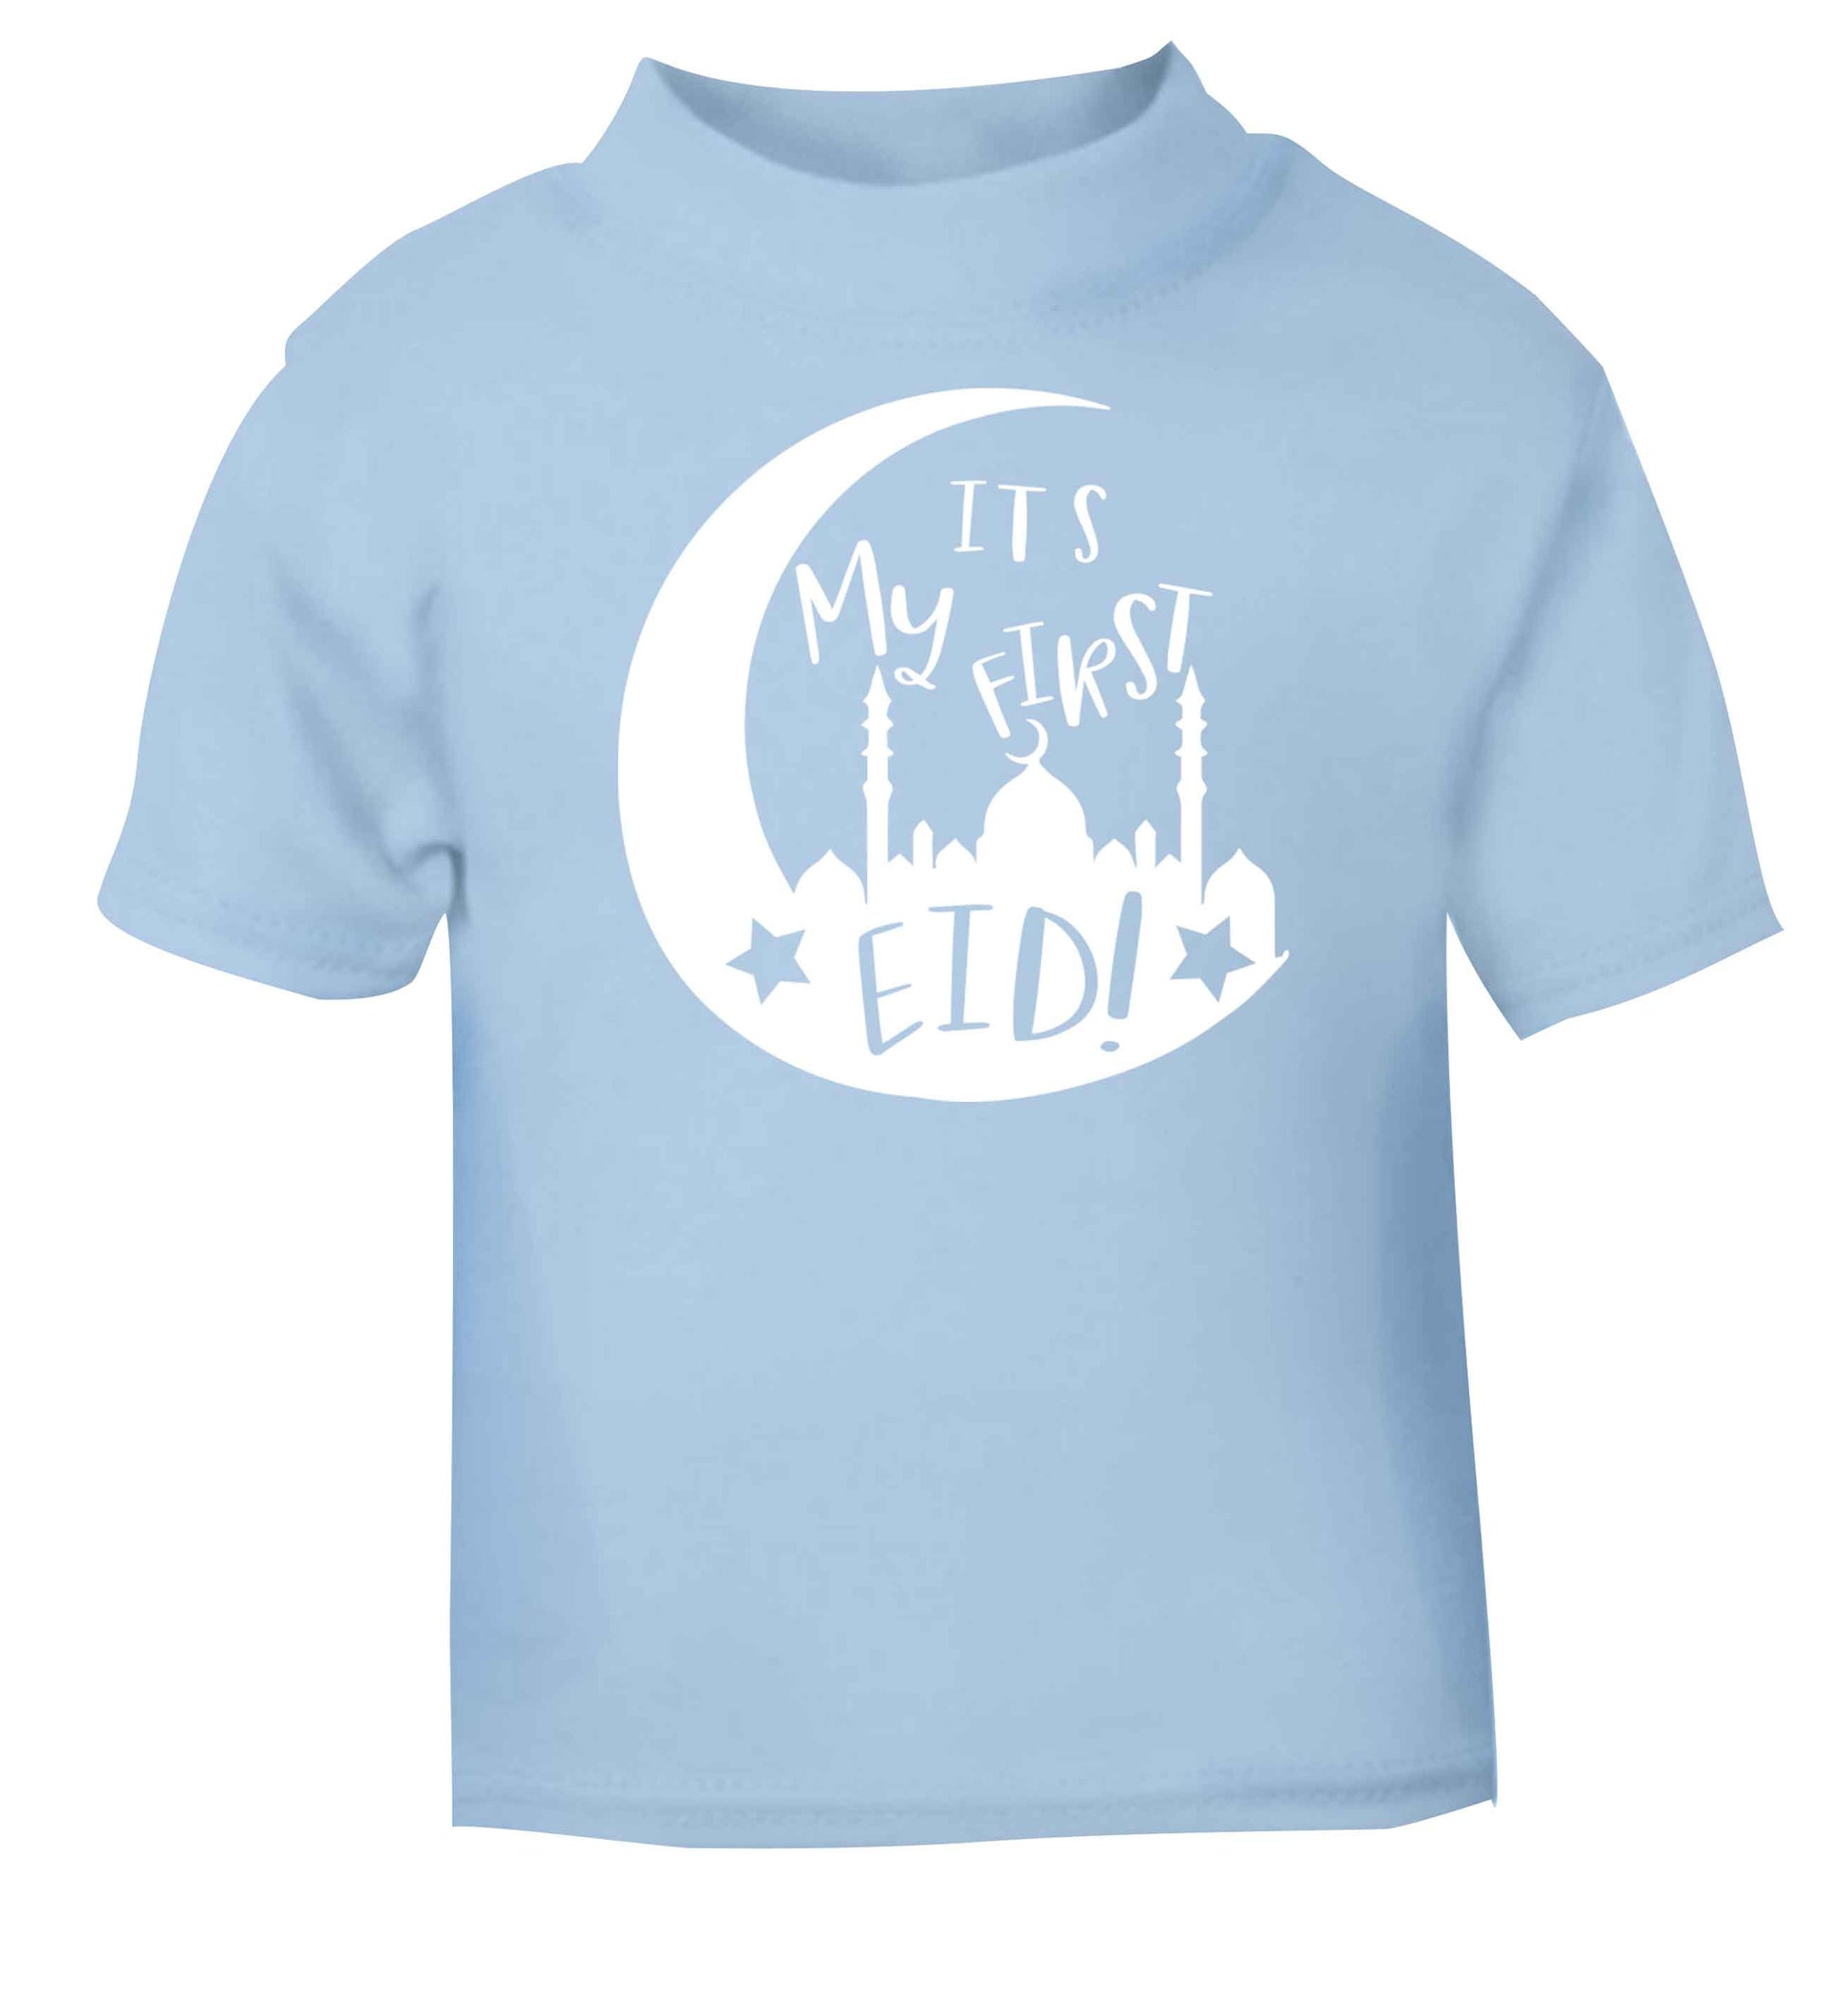 It's my first Eid moon light blue baby toddler Tshirt 2 Years